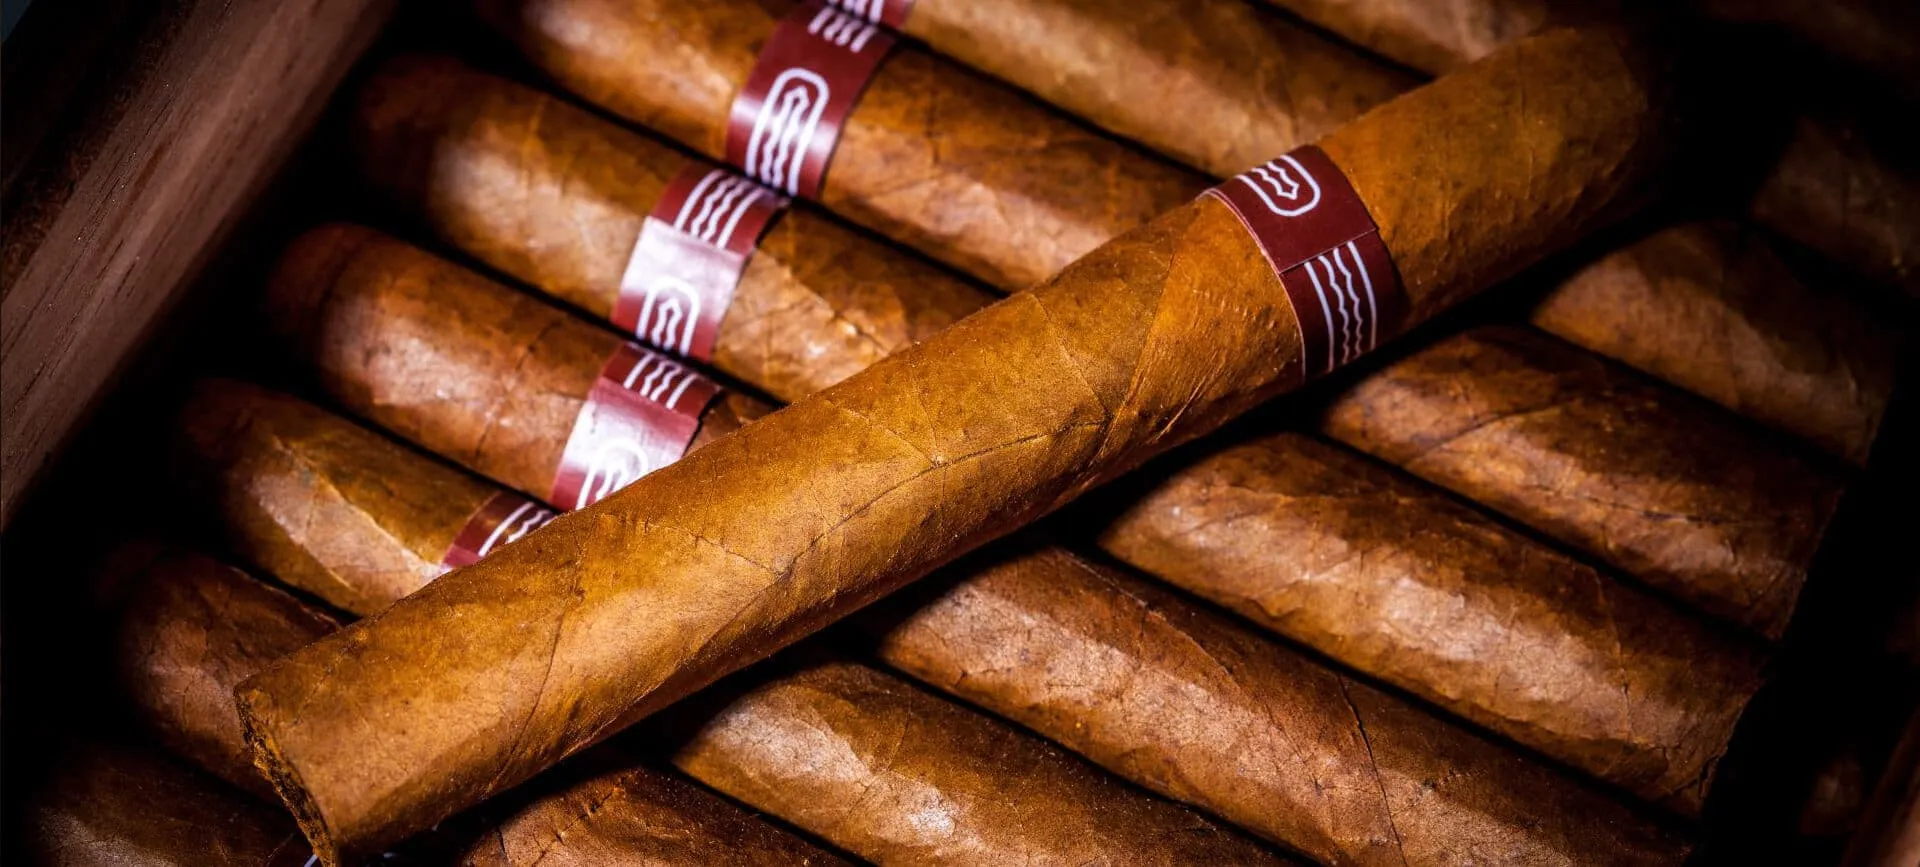 Turmeaus Cigars & Whisky in United Kingdom, europe | Tobacco Products - Country Helper